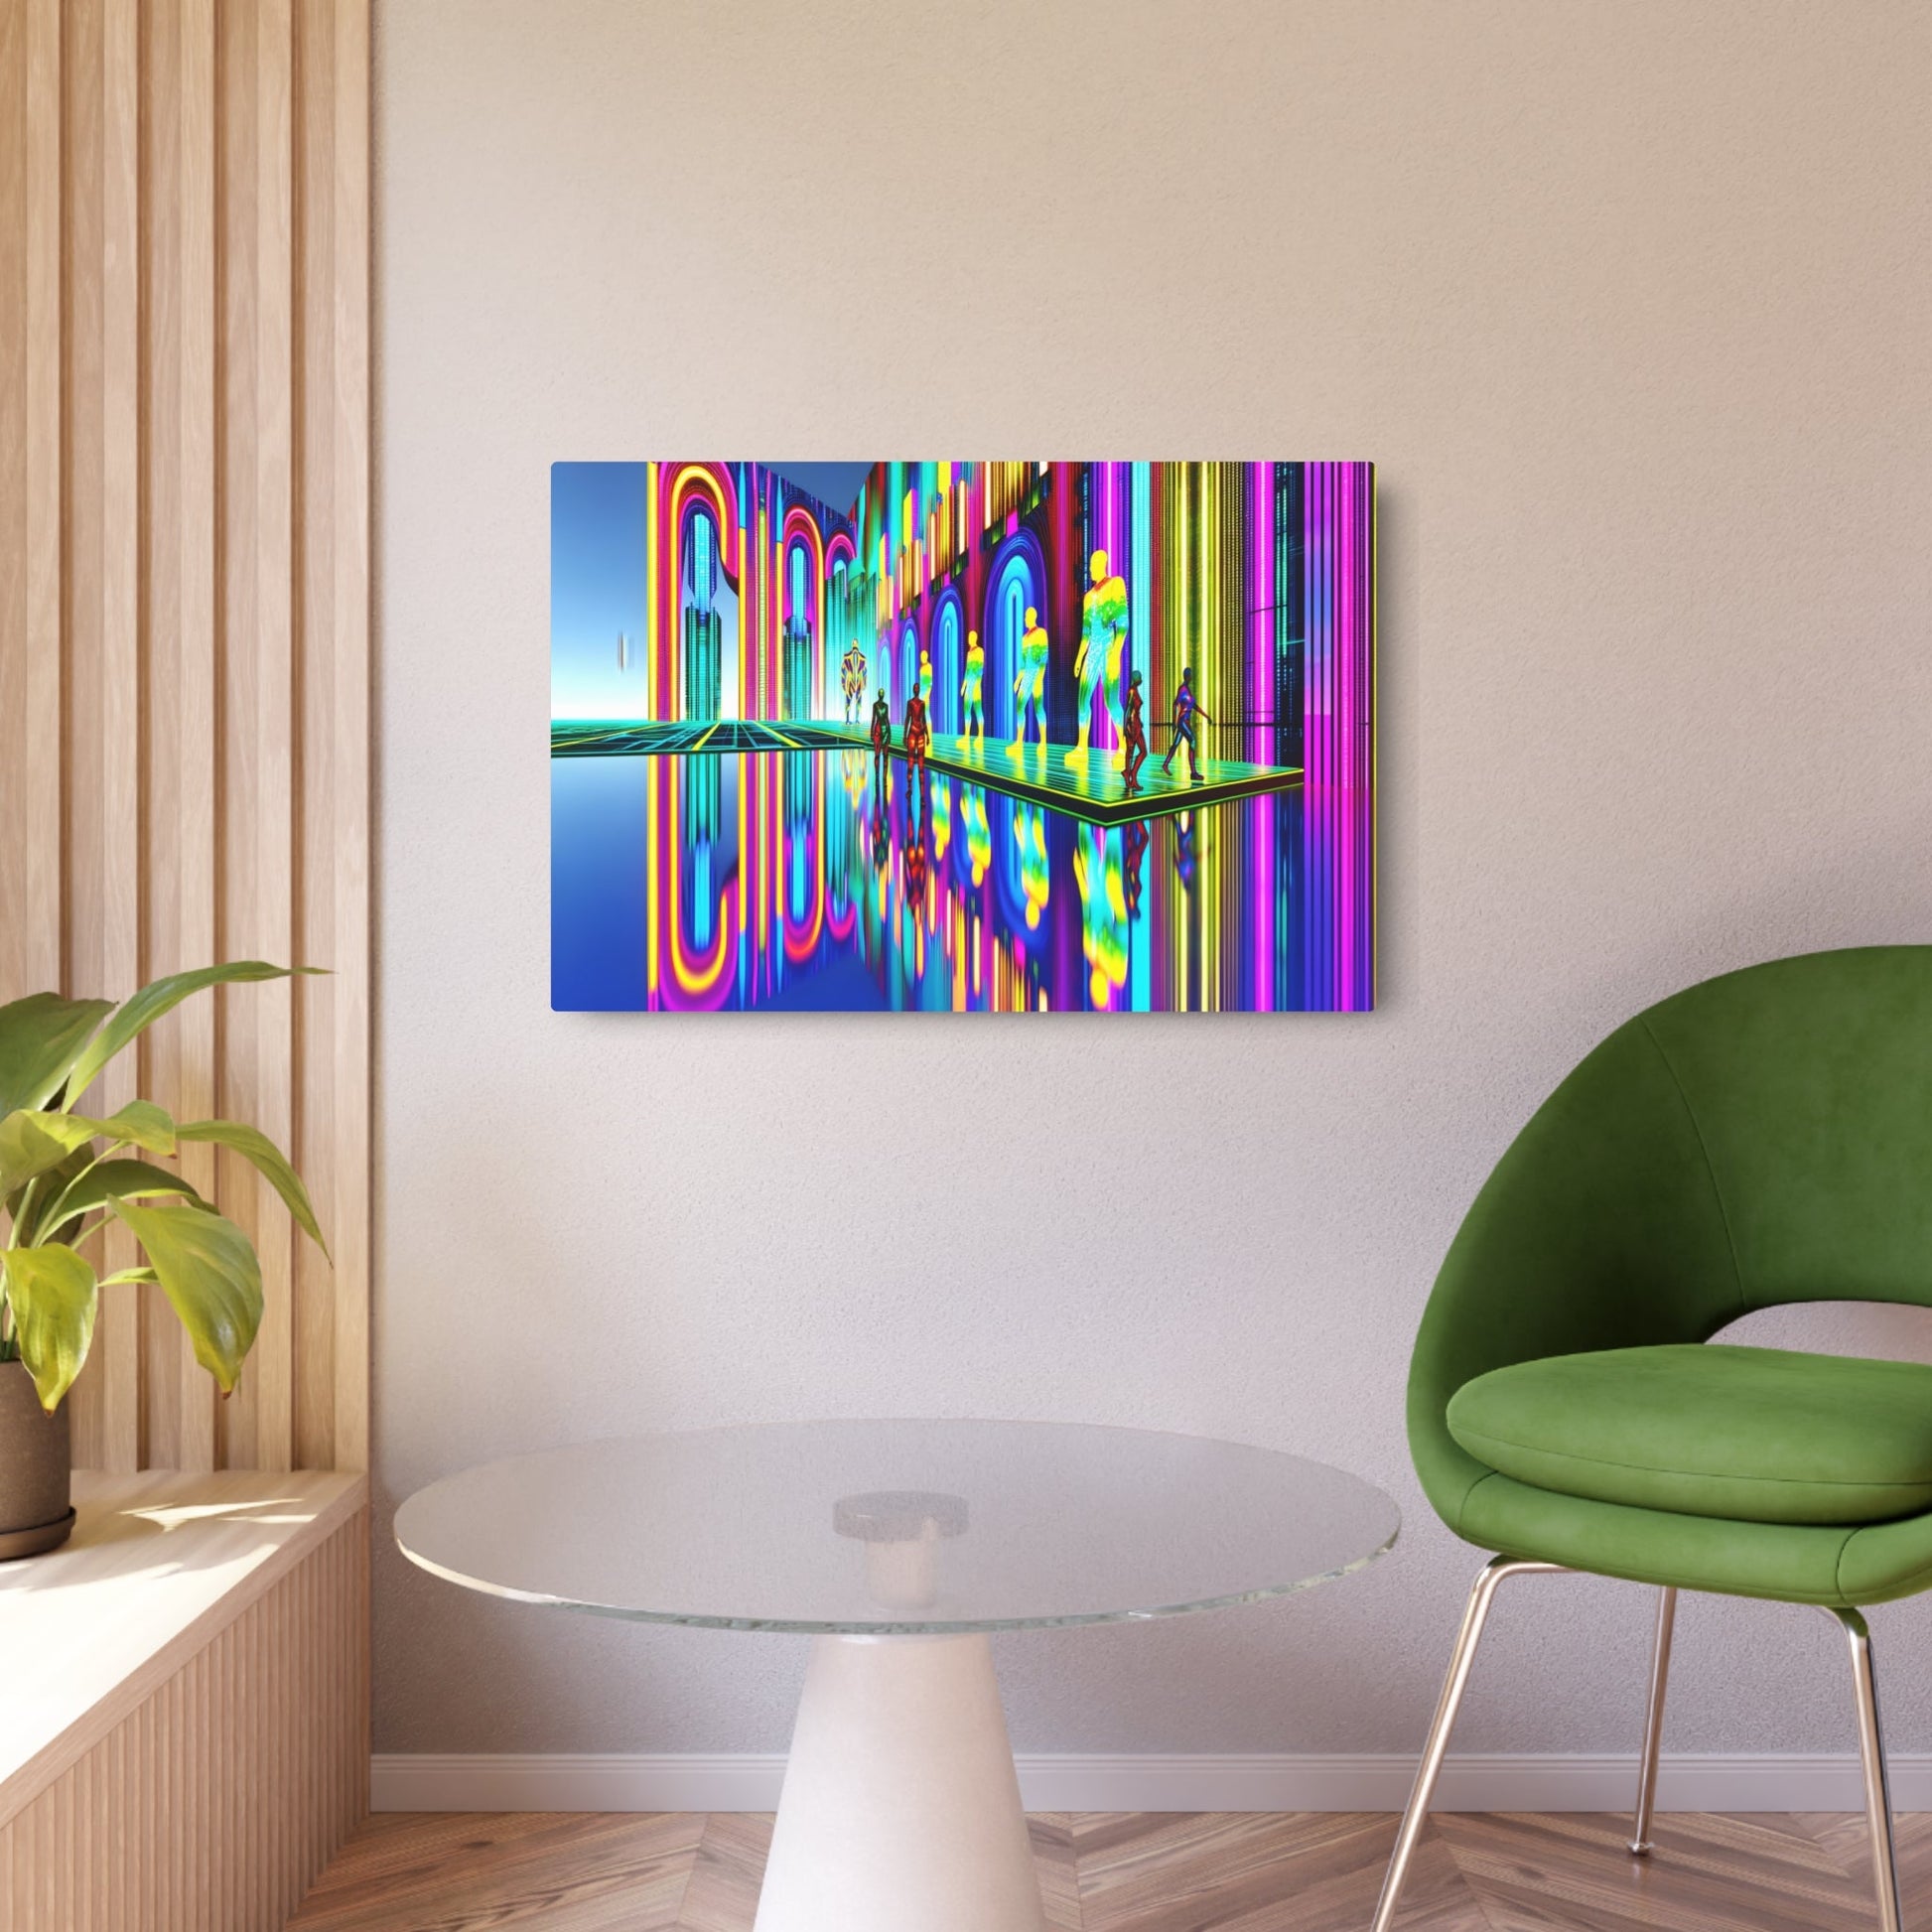 Metal Poster Art | "Modern Contemporary Digital Art - Vibrant Neon Landscape with Futuristic Architecture & Hyperrealistic Characters Interaction" - Metal Poster Art 36″ x 24″ (Horizontal) 0.12''